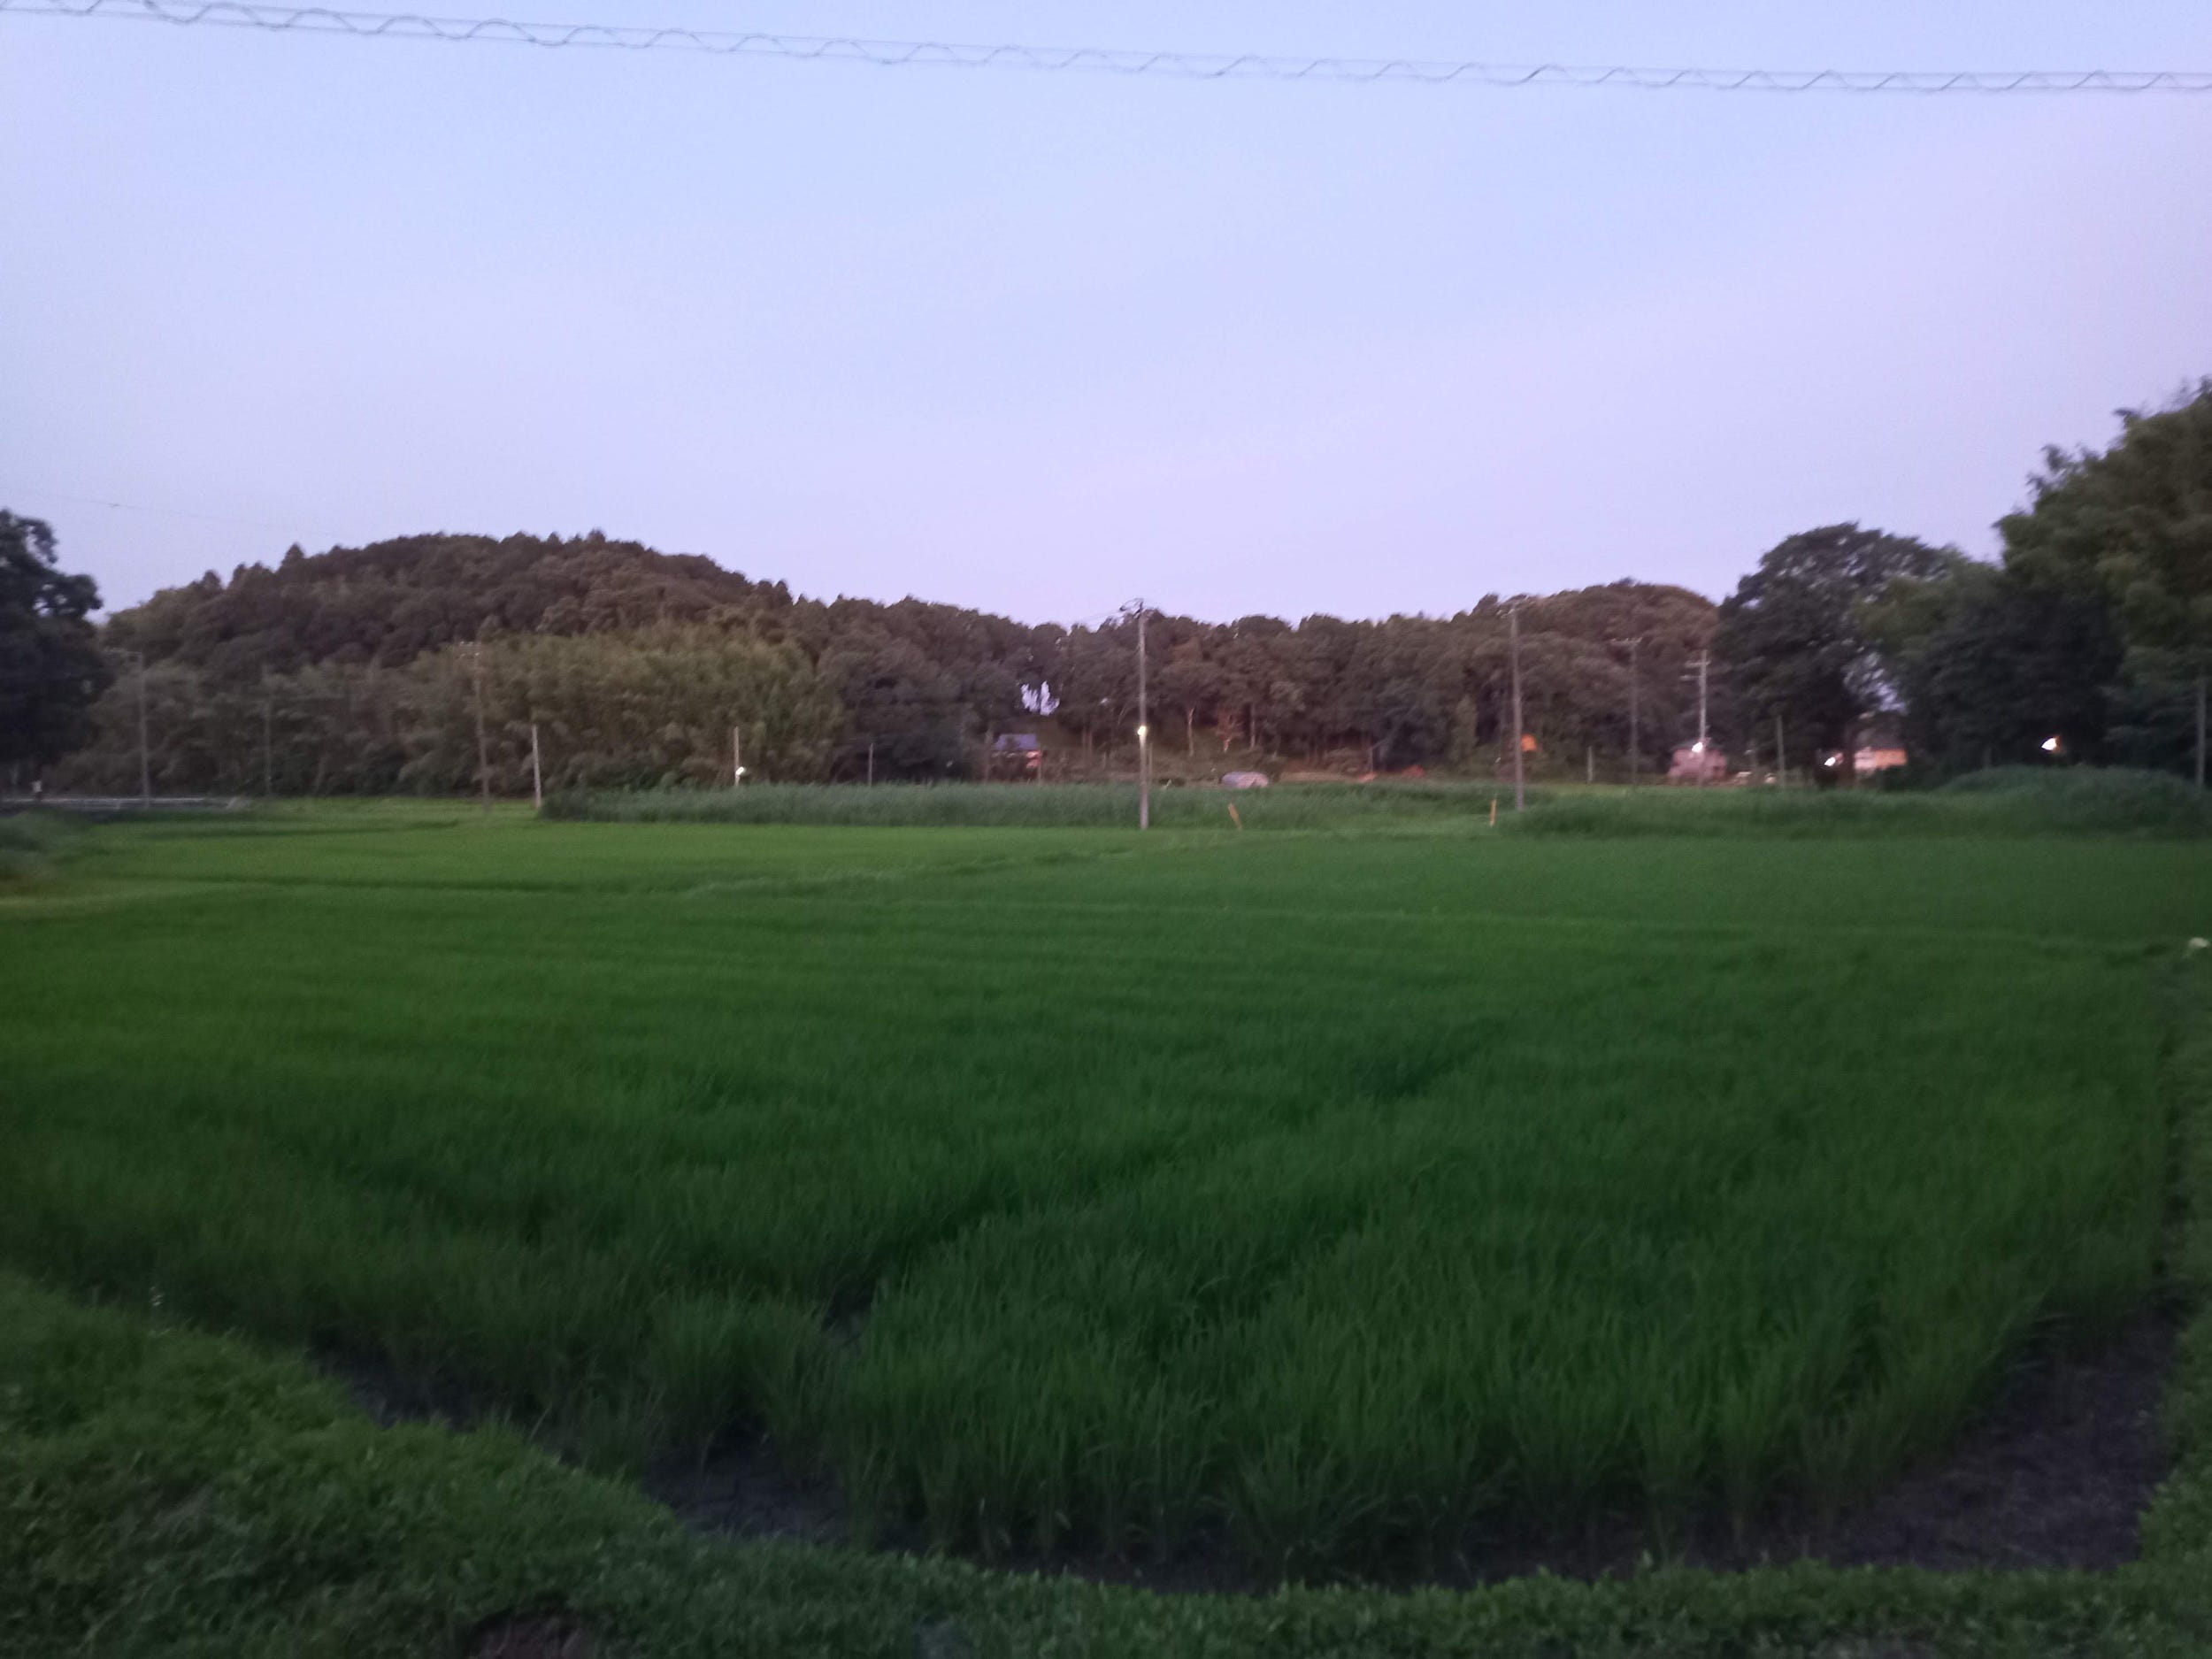 i bought a house in japan for less than $45,000. i live in the peaceful countryside close to every convenience, and everything's cheaper here.